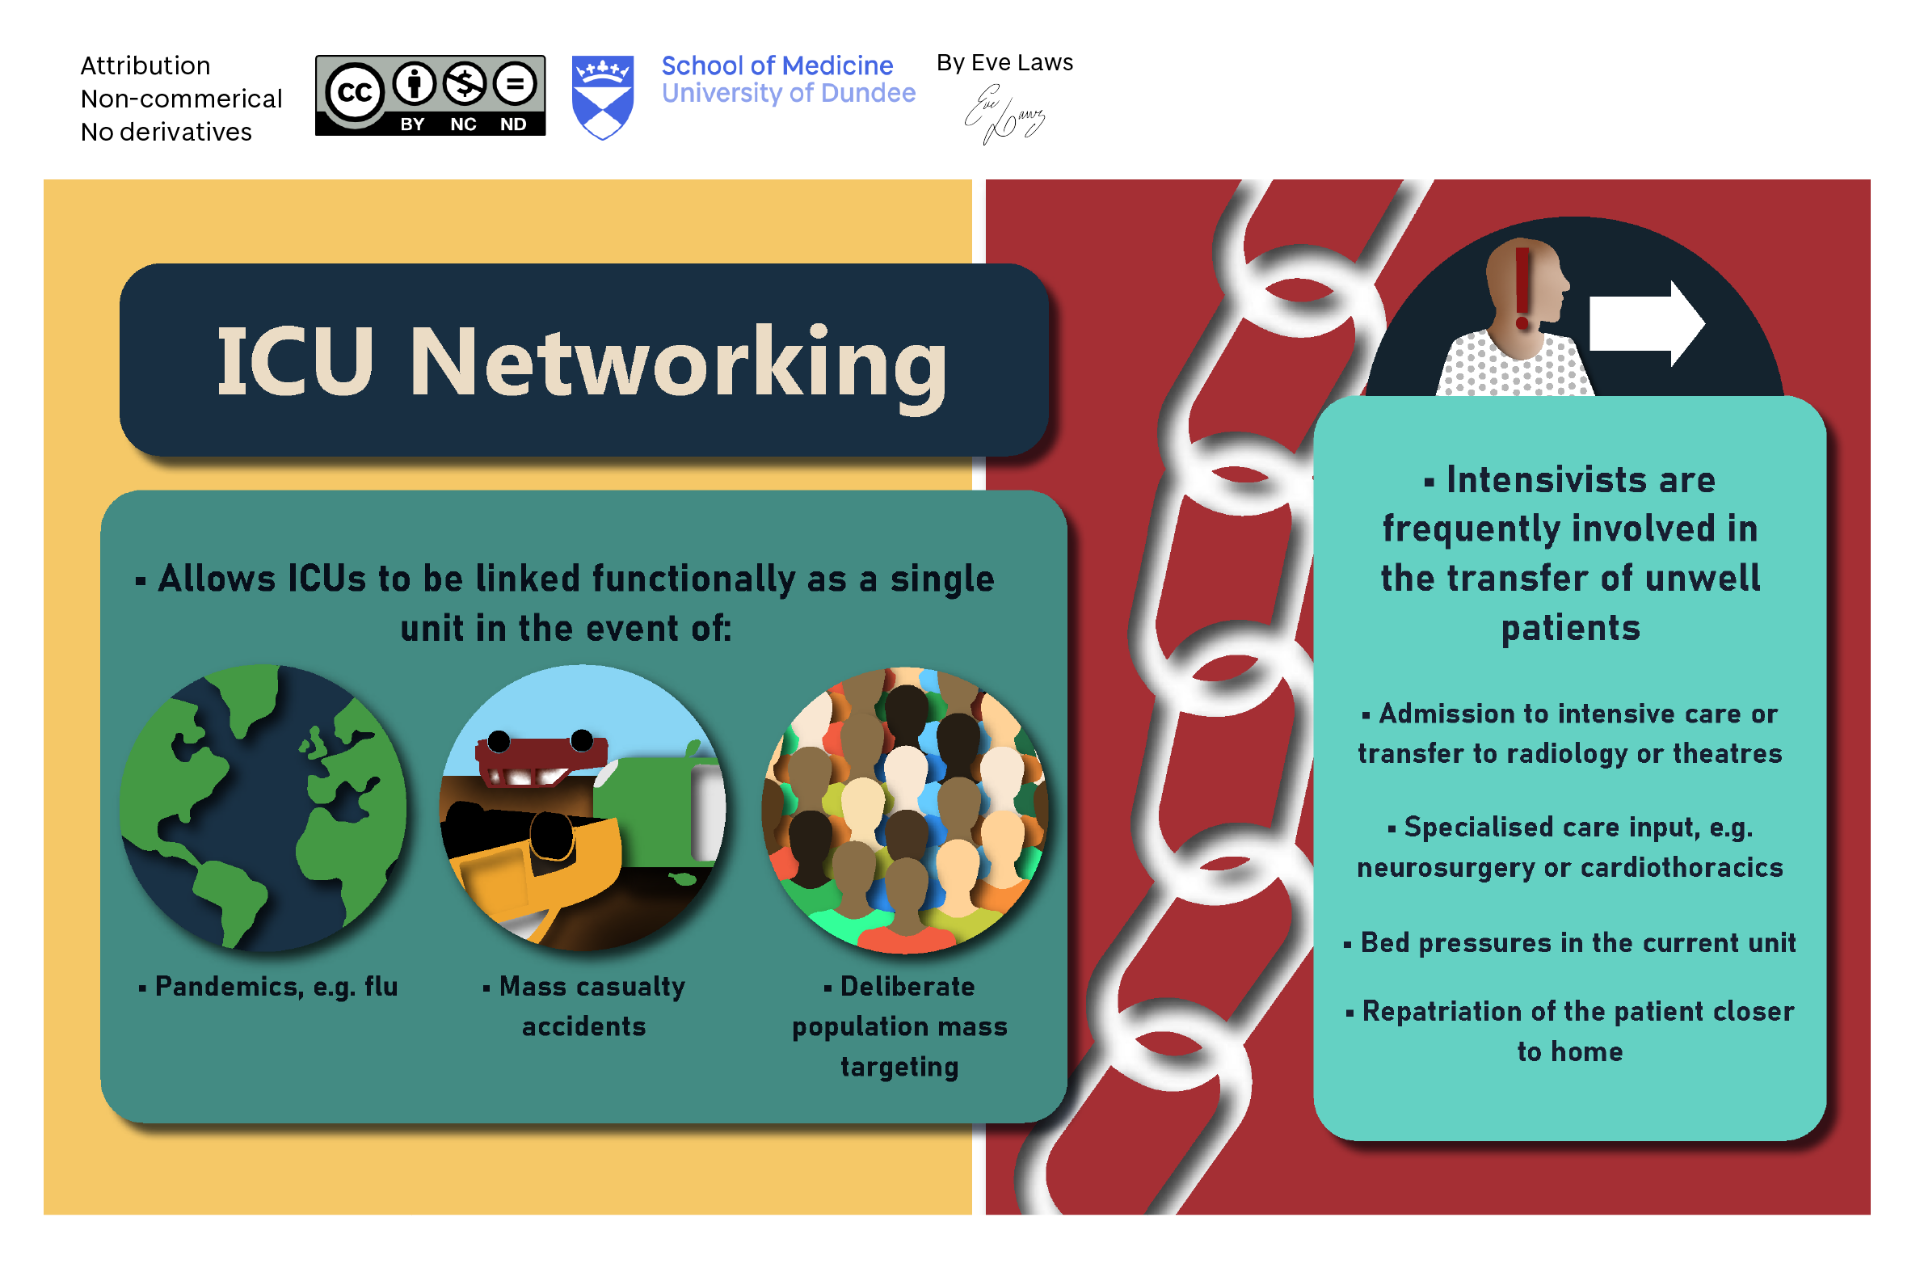 ICU networking page